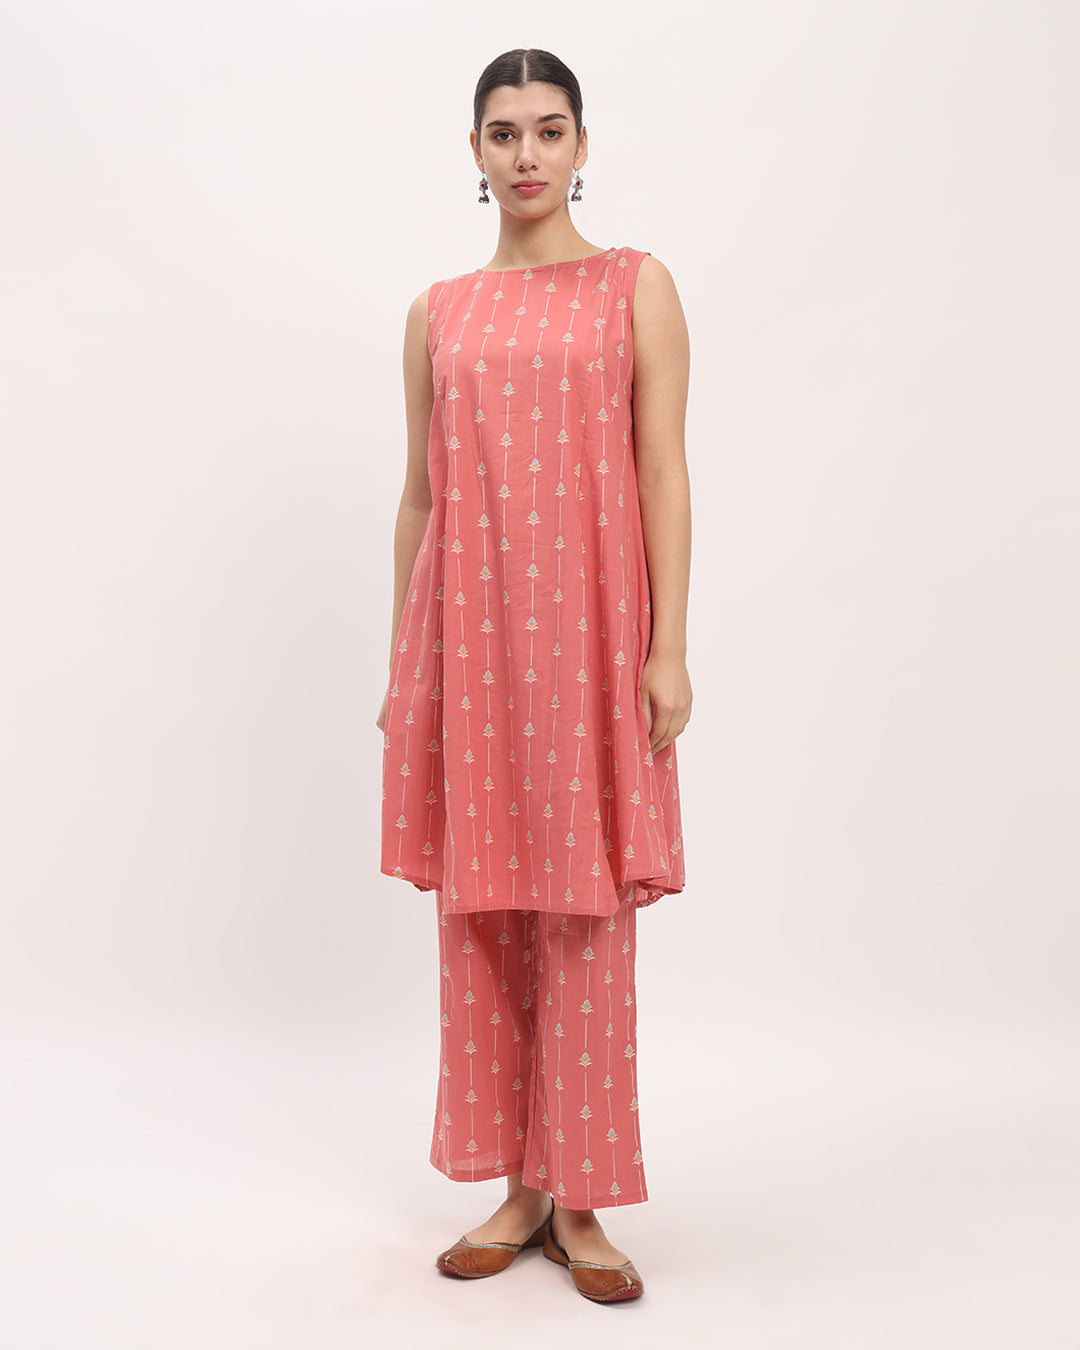 Combo: English Floral Tracks & Lavender Paisley Sleeveless A-Line Printed Kurta (Without Bottoms)